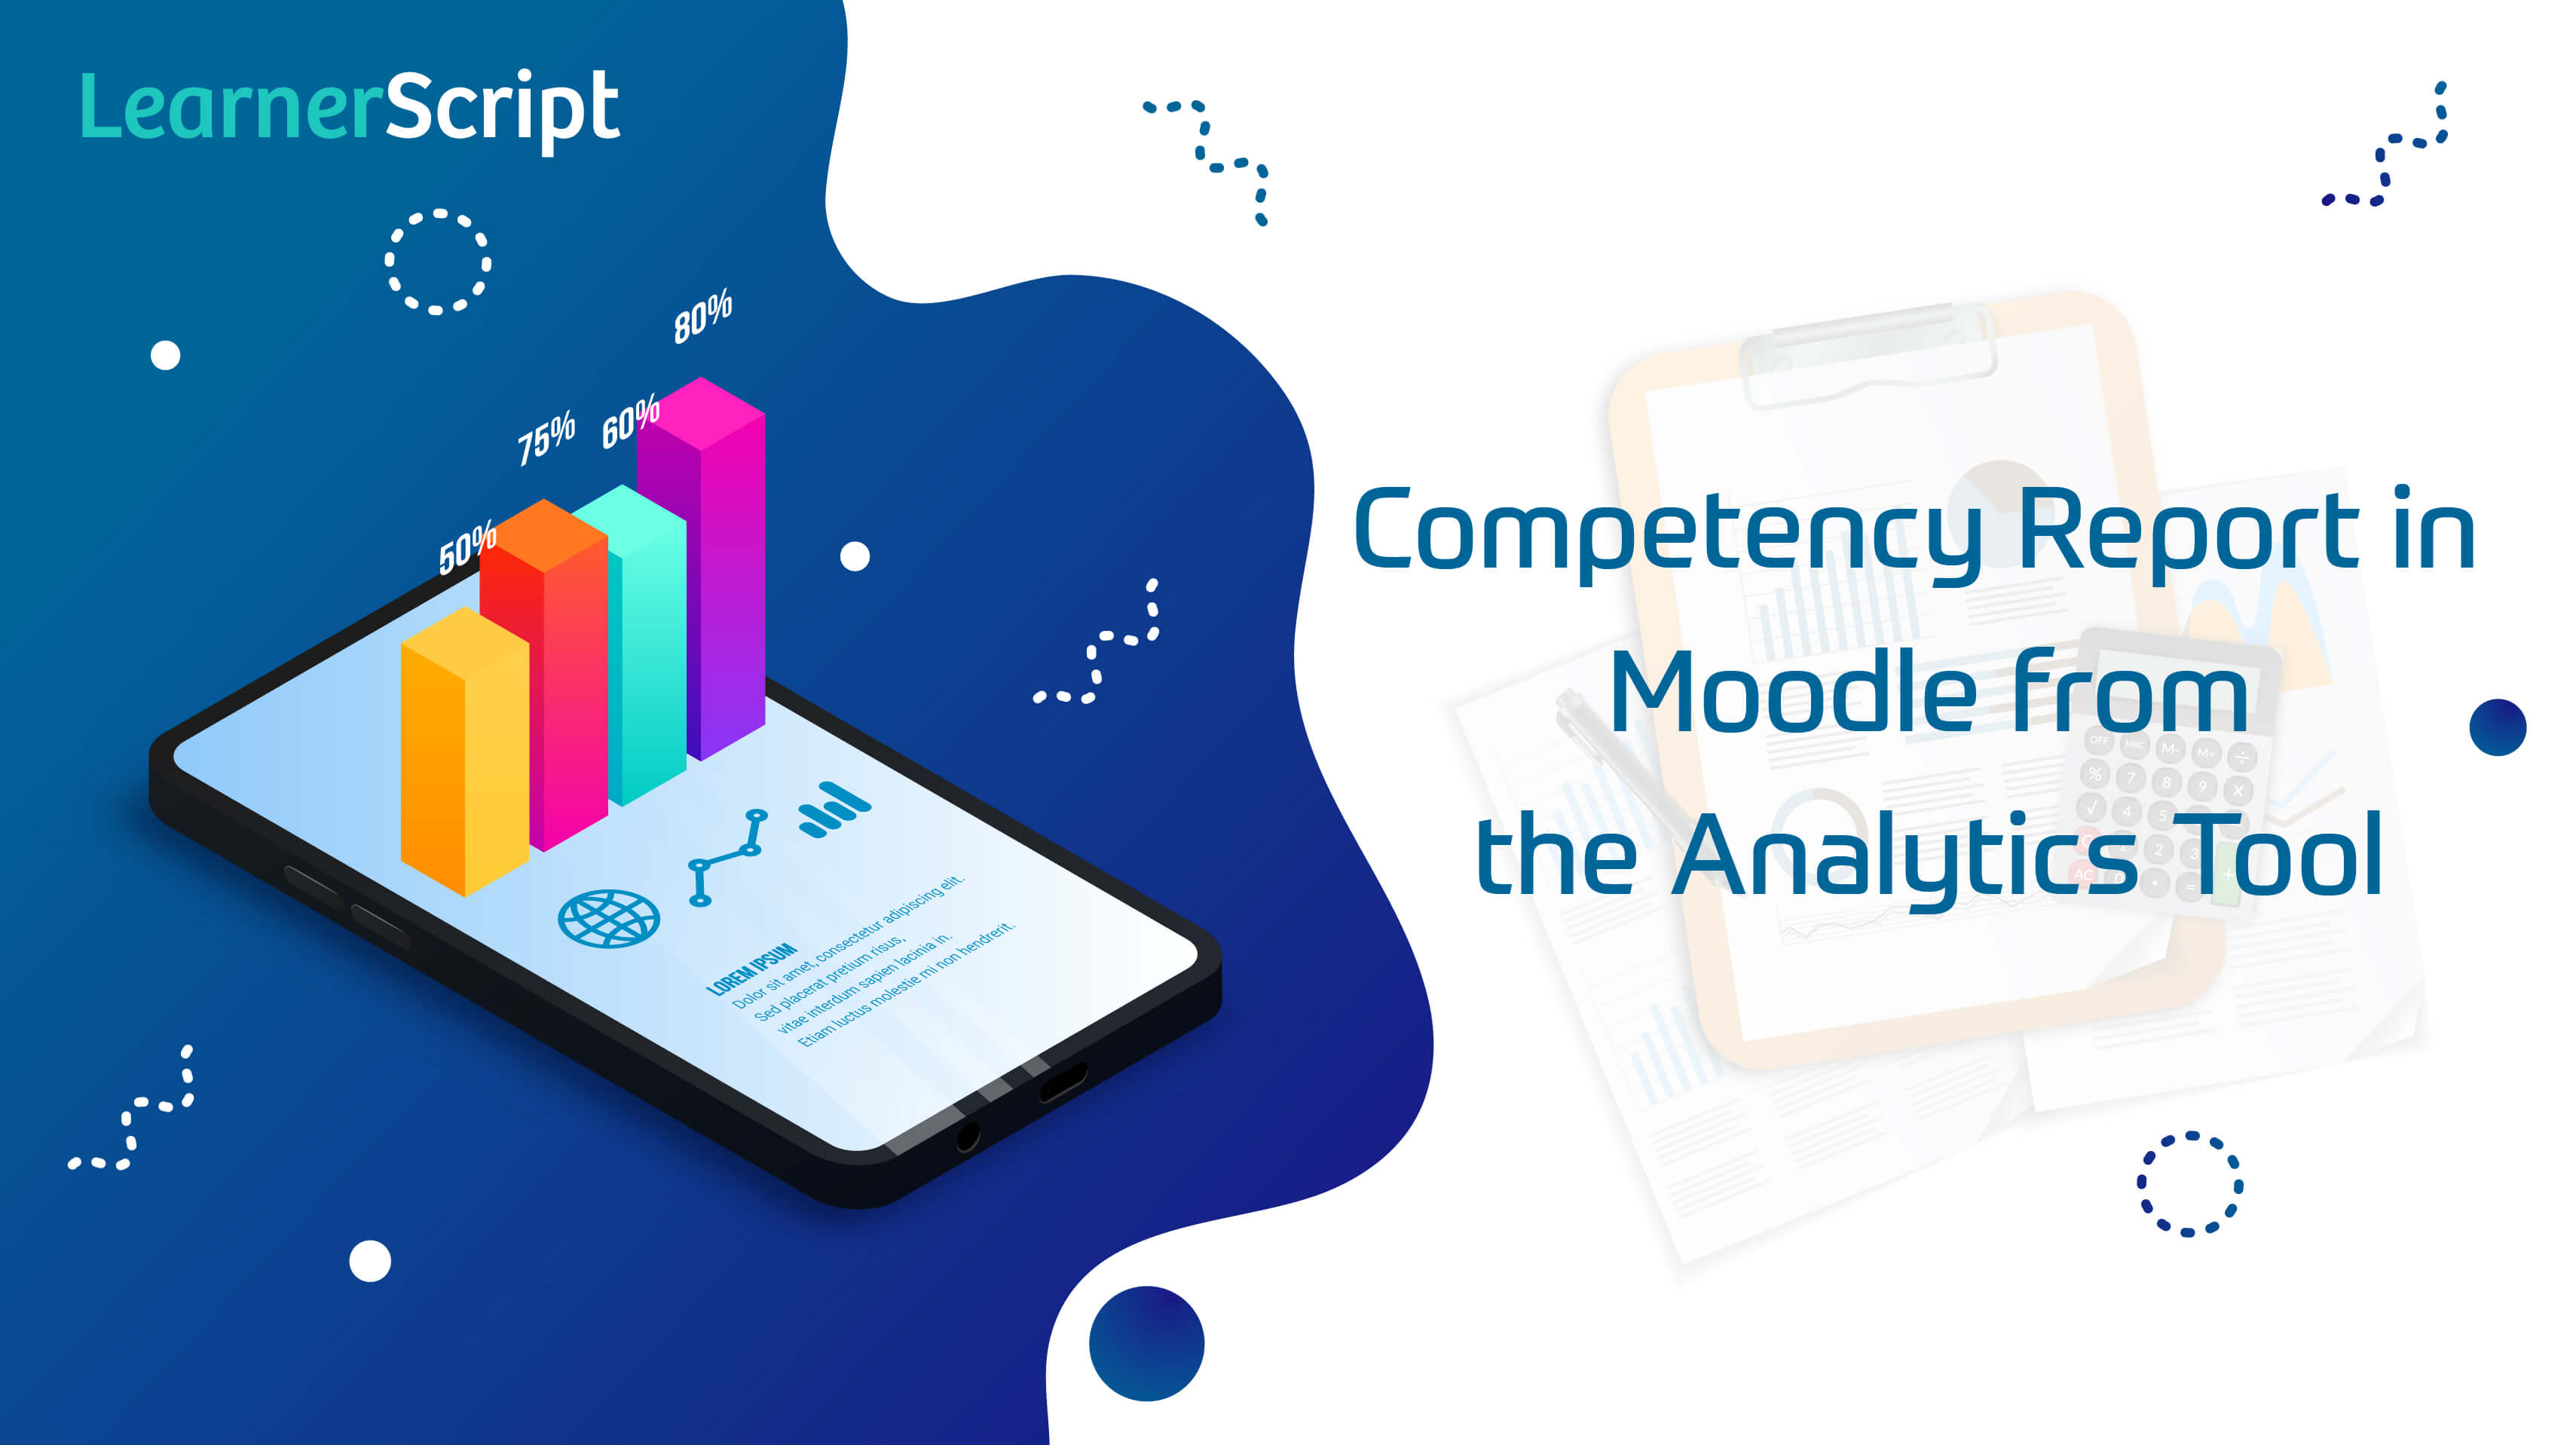 Competency report in moodle